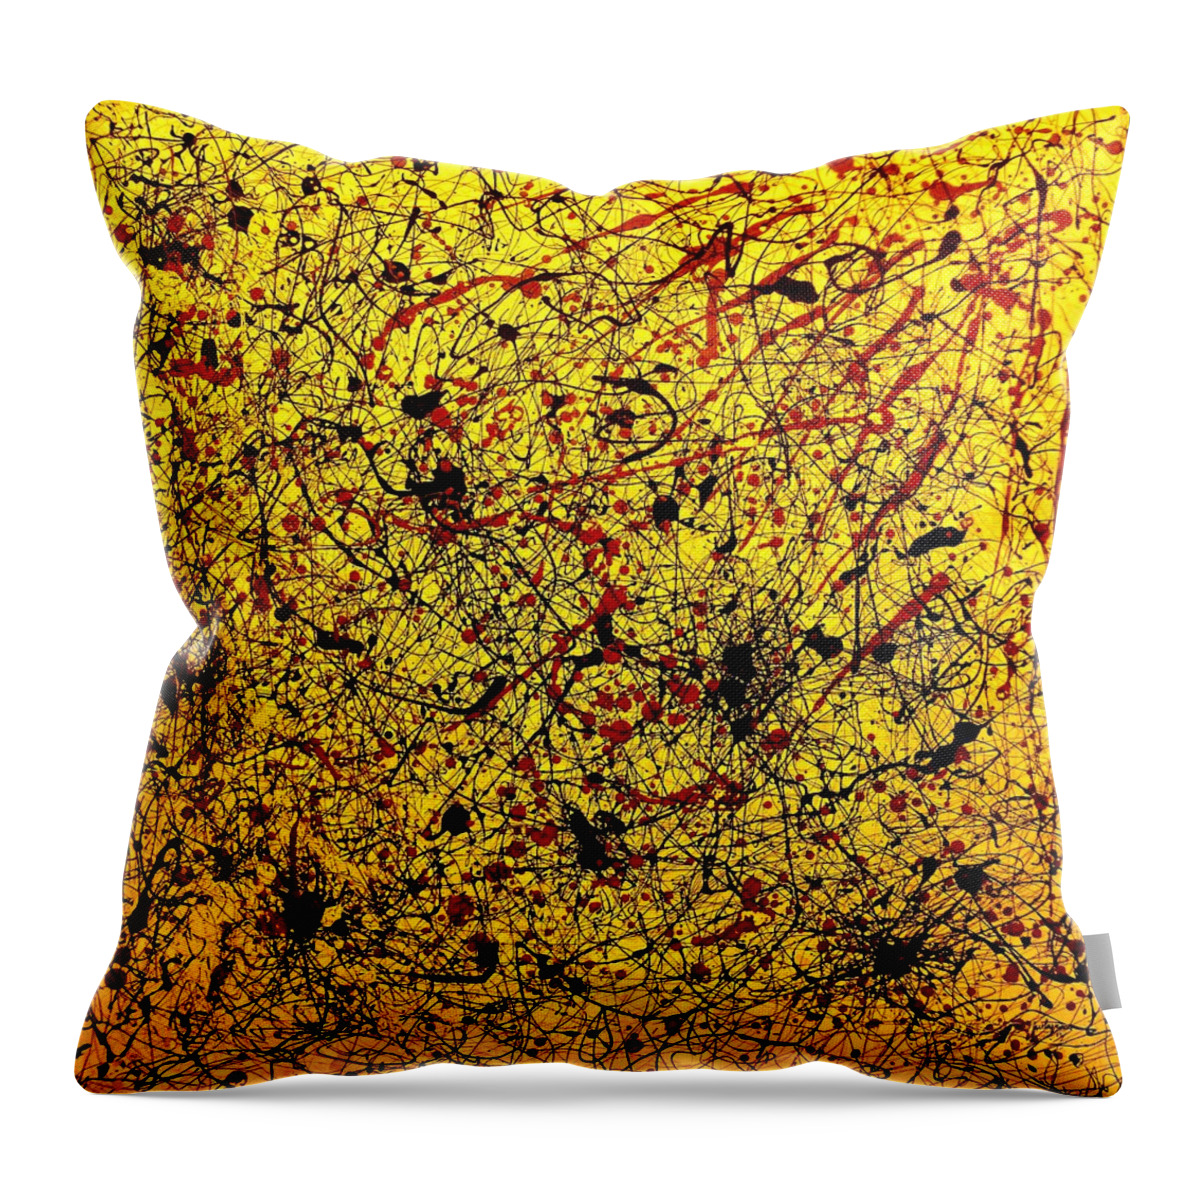 Xpressionz Within Throw Pillow featuring the painting Xpressionz Within by Piety Dsilva